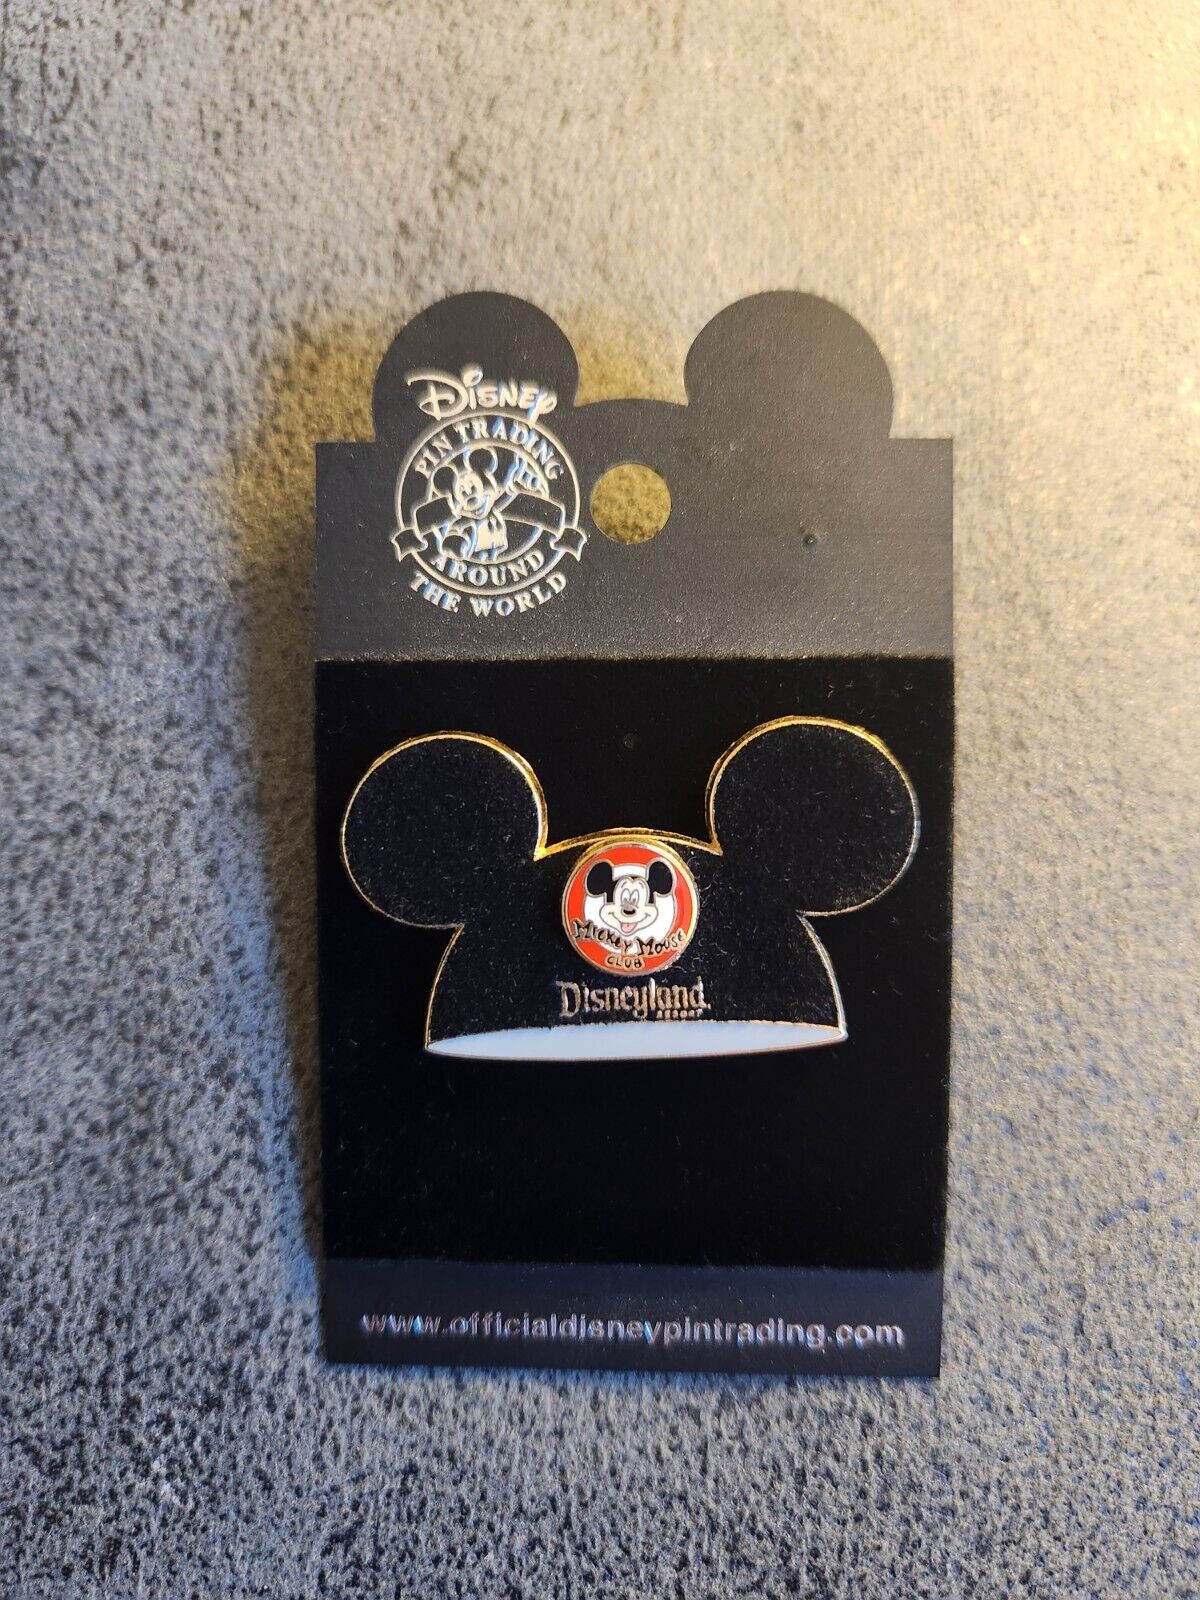 DLR - Mickey Mouse Club Ears Hat - Flocked Disney Pin 30920